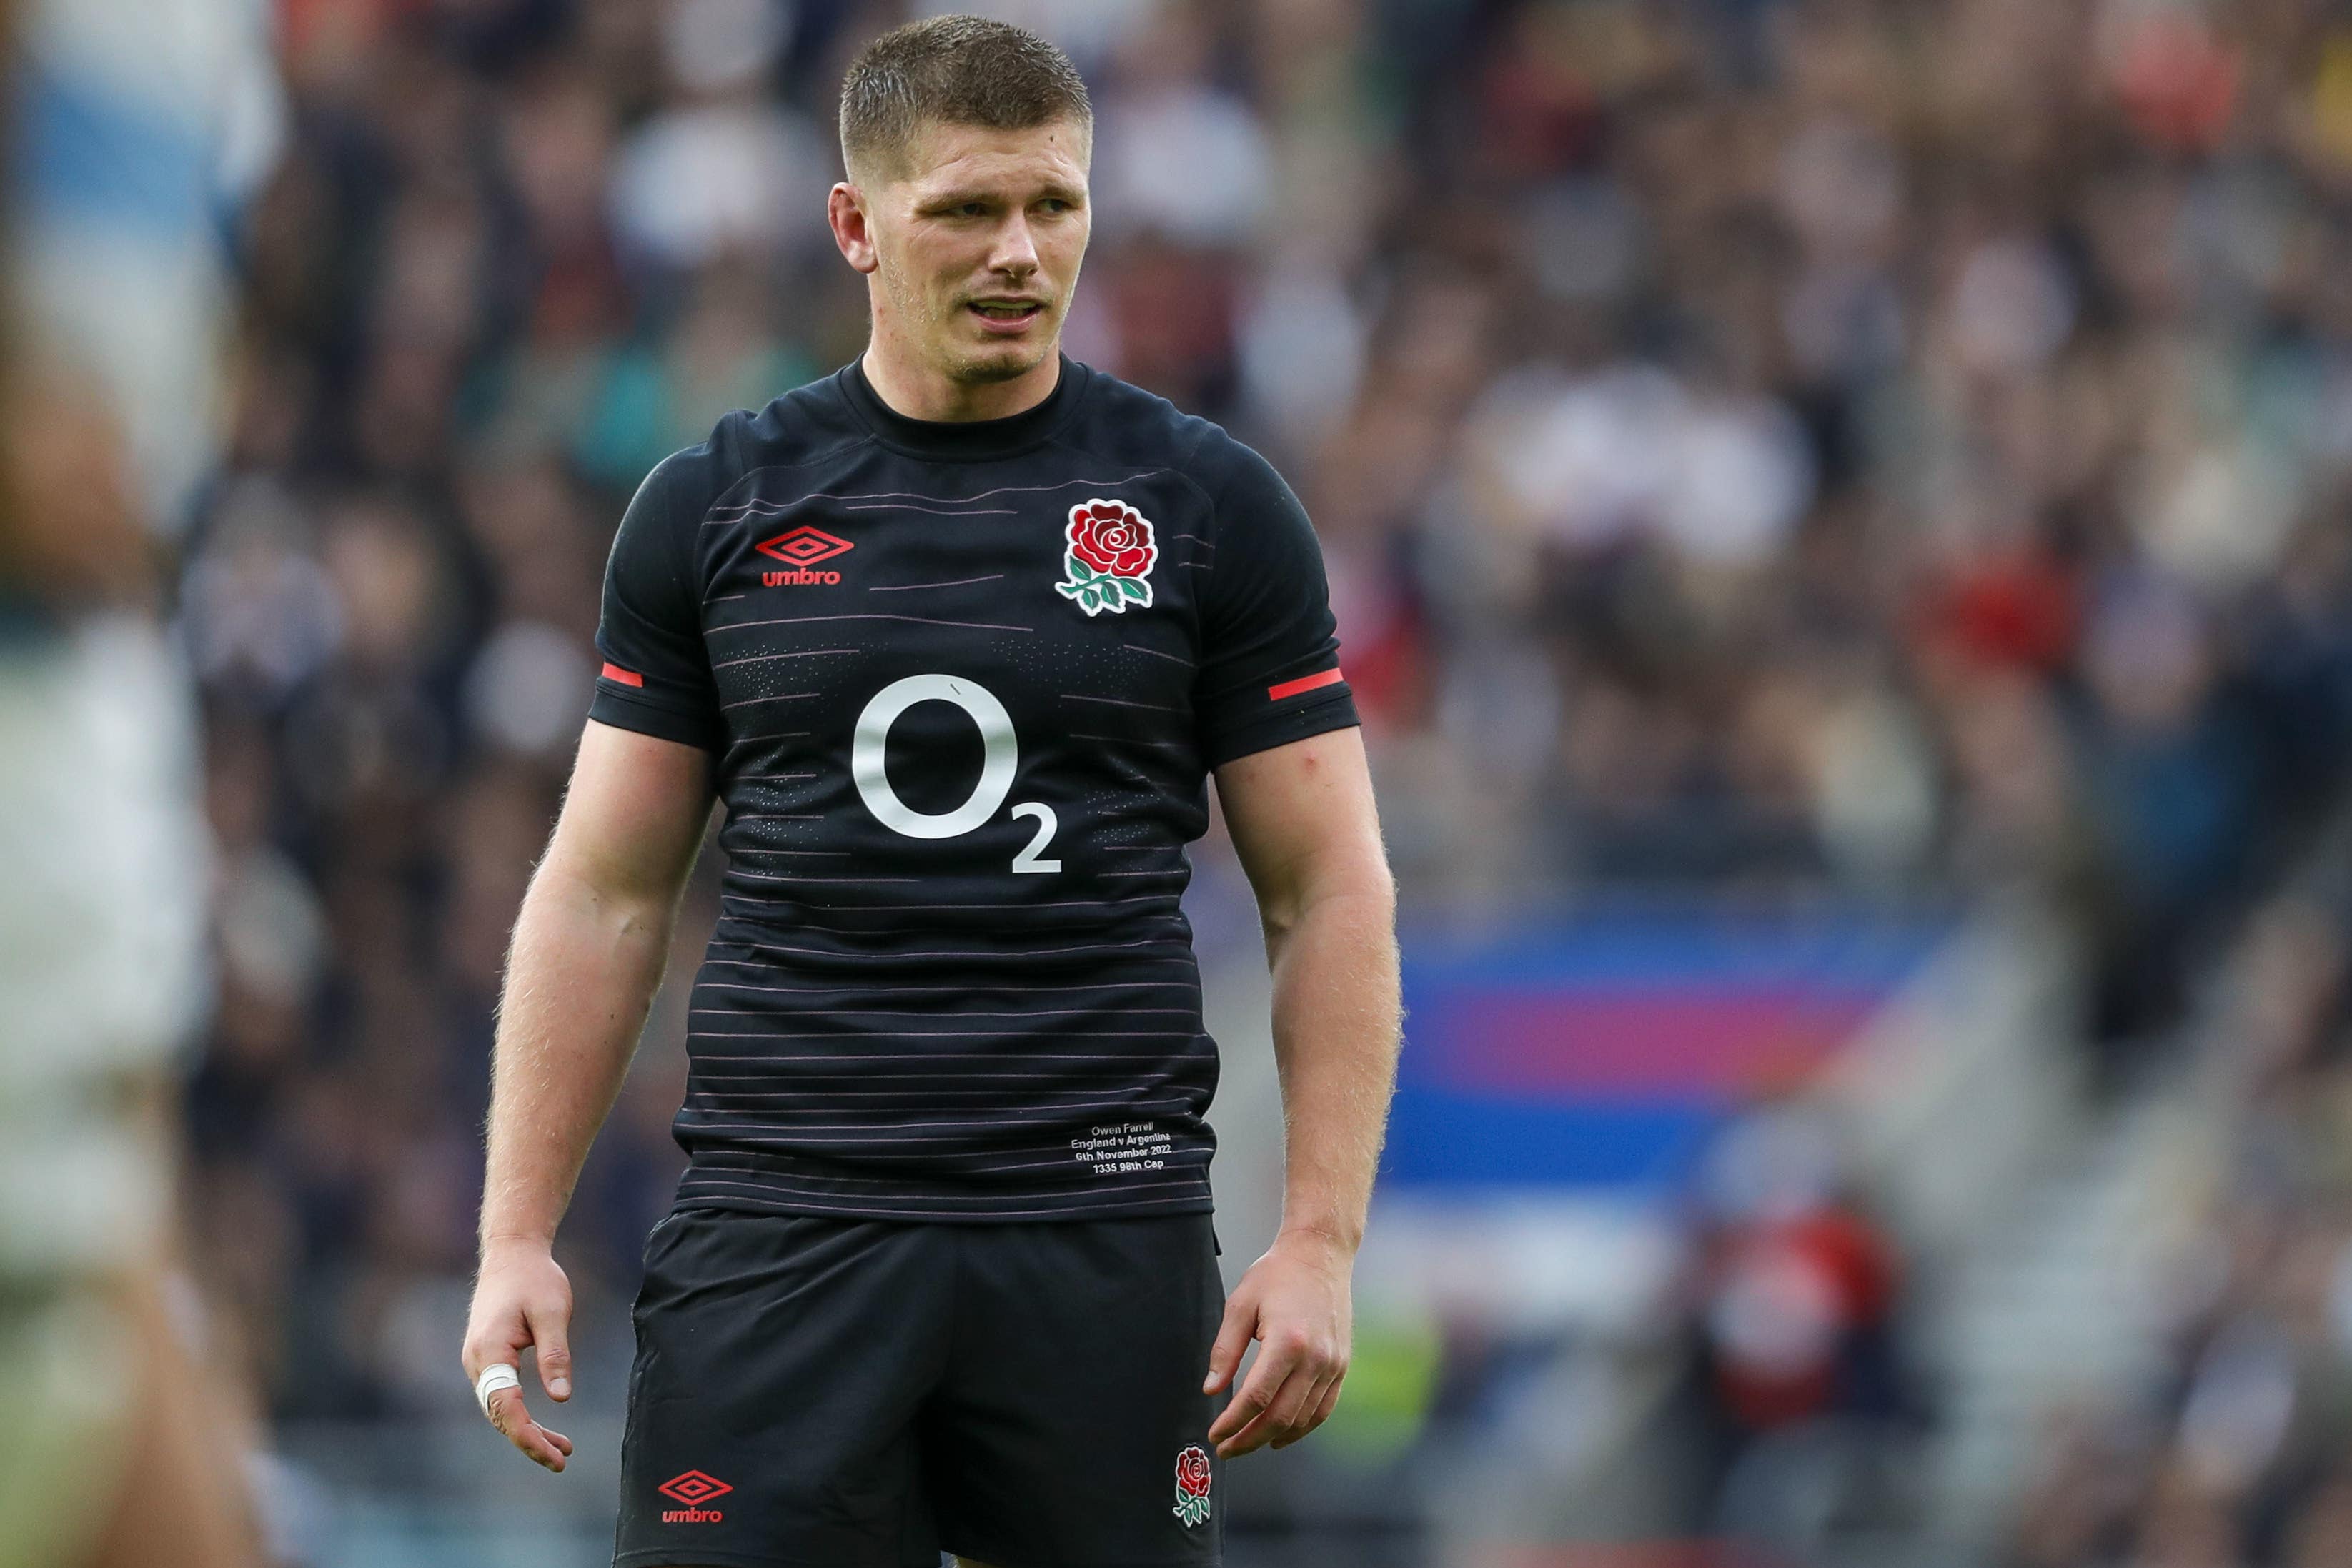 Owen Farrell will win his 100th cap for England against New Zealand (Ben Whitley/PA)